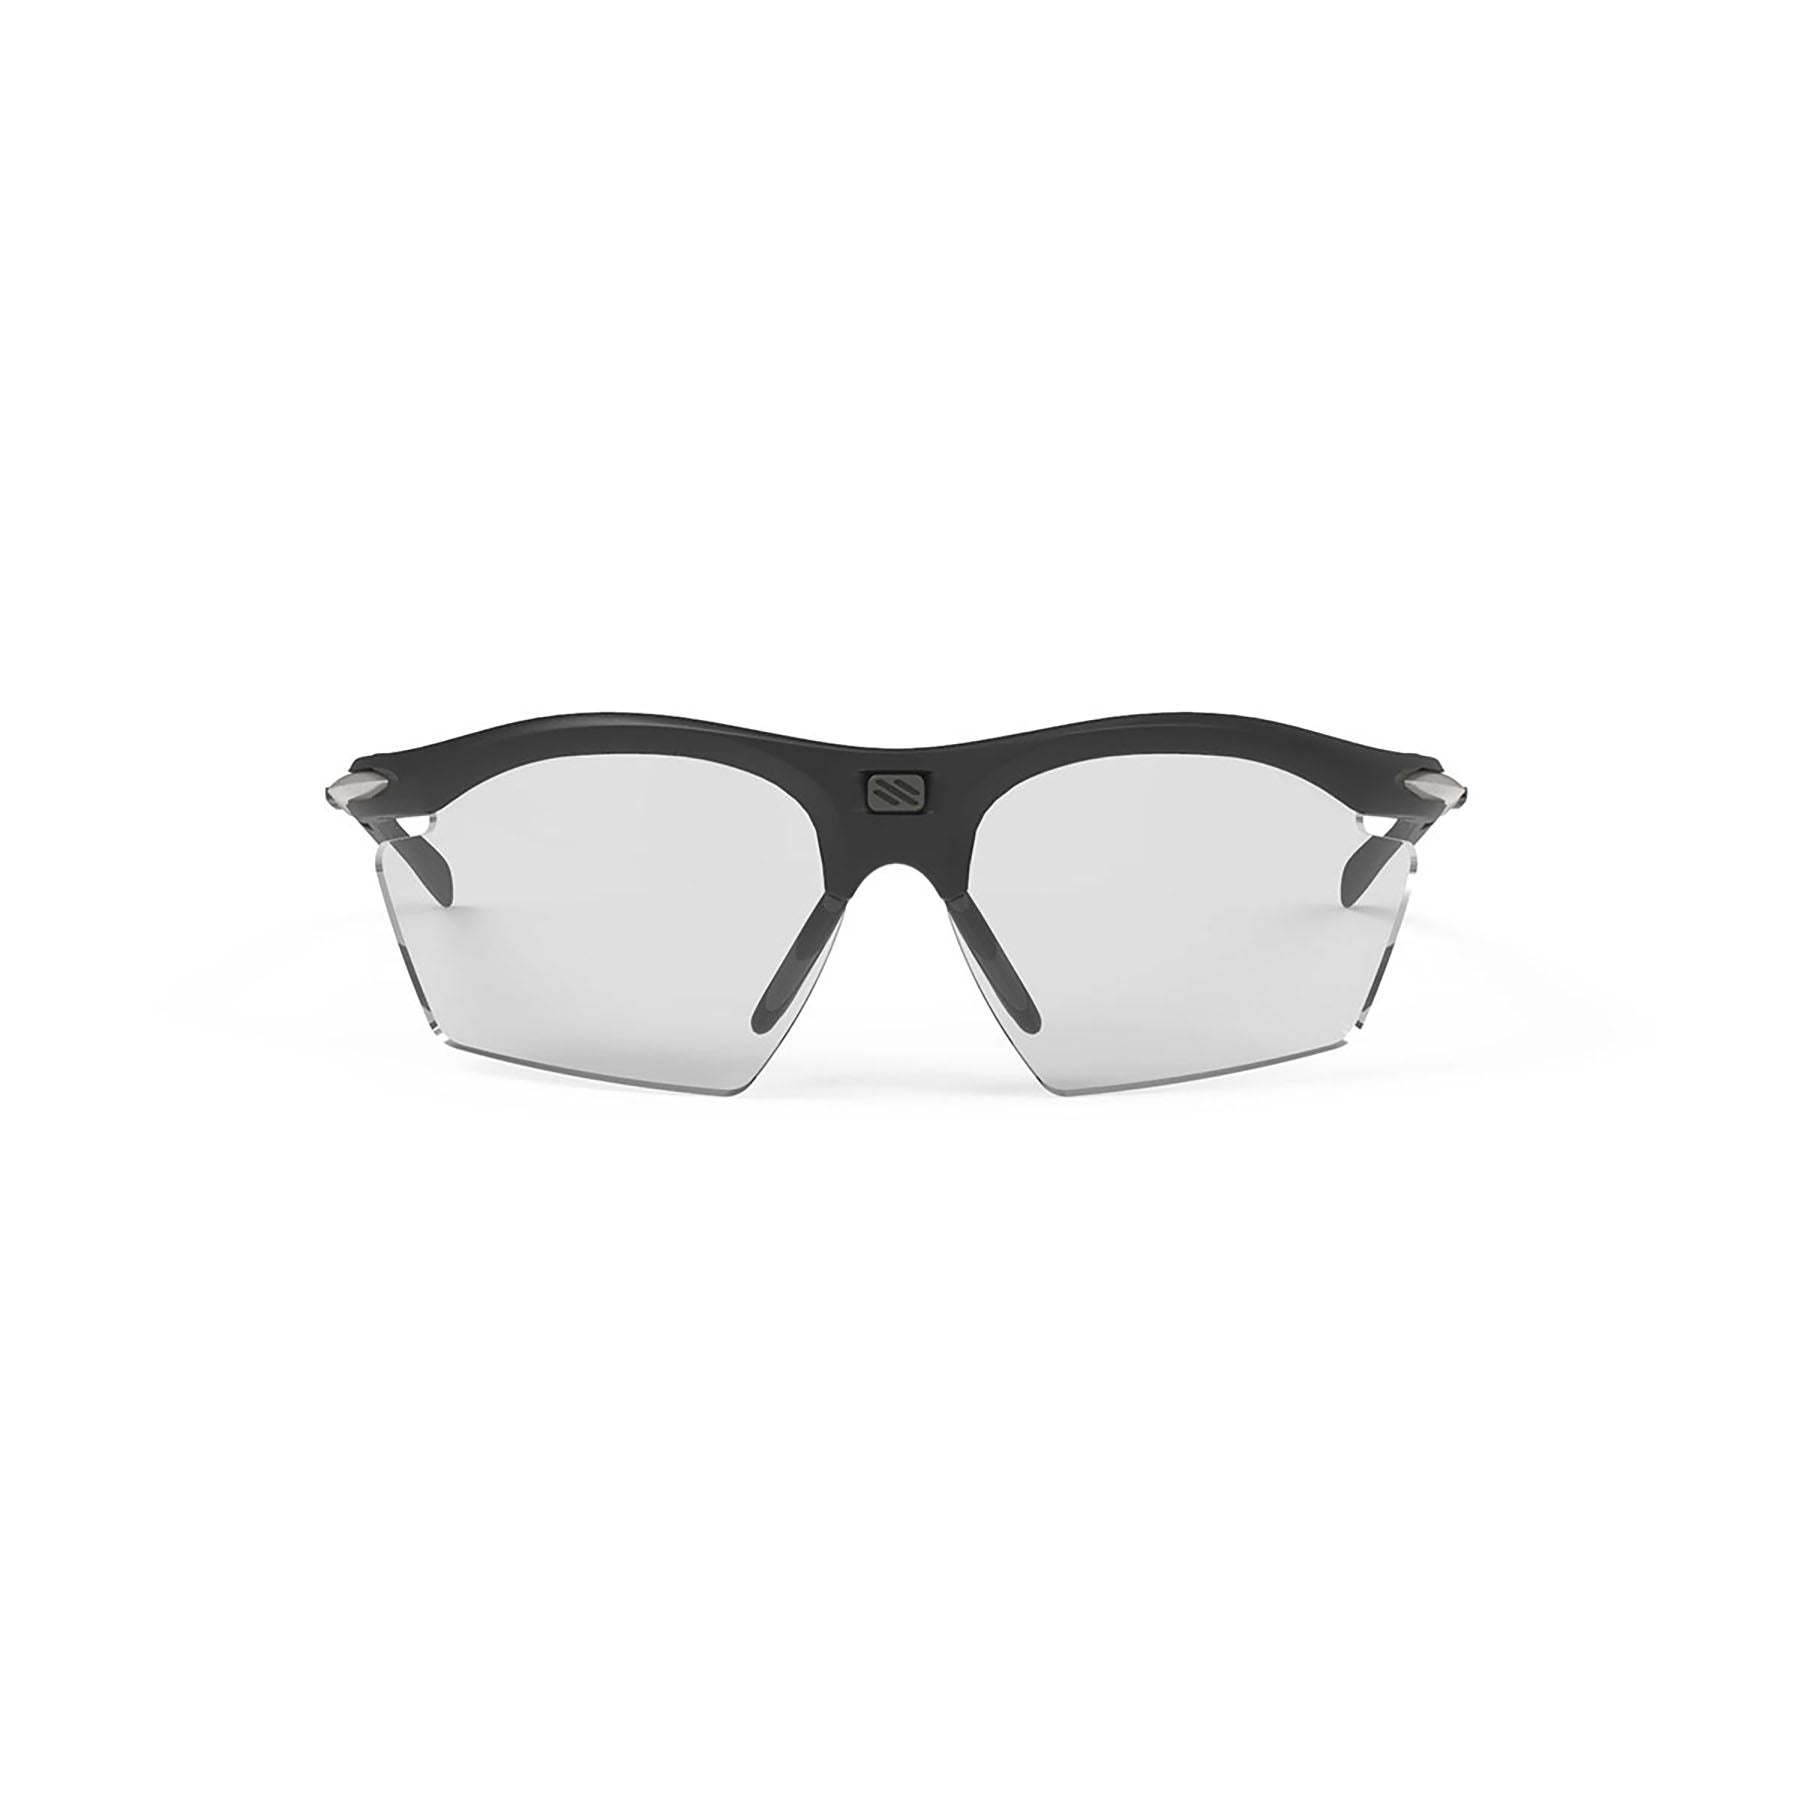 Rudy Project prescription ready running and cycling womens sport sunglasses#color_rydon-slim-matte-black-frame-and-impactx-photochromic-2-black-lenses